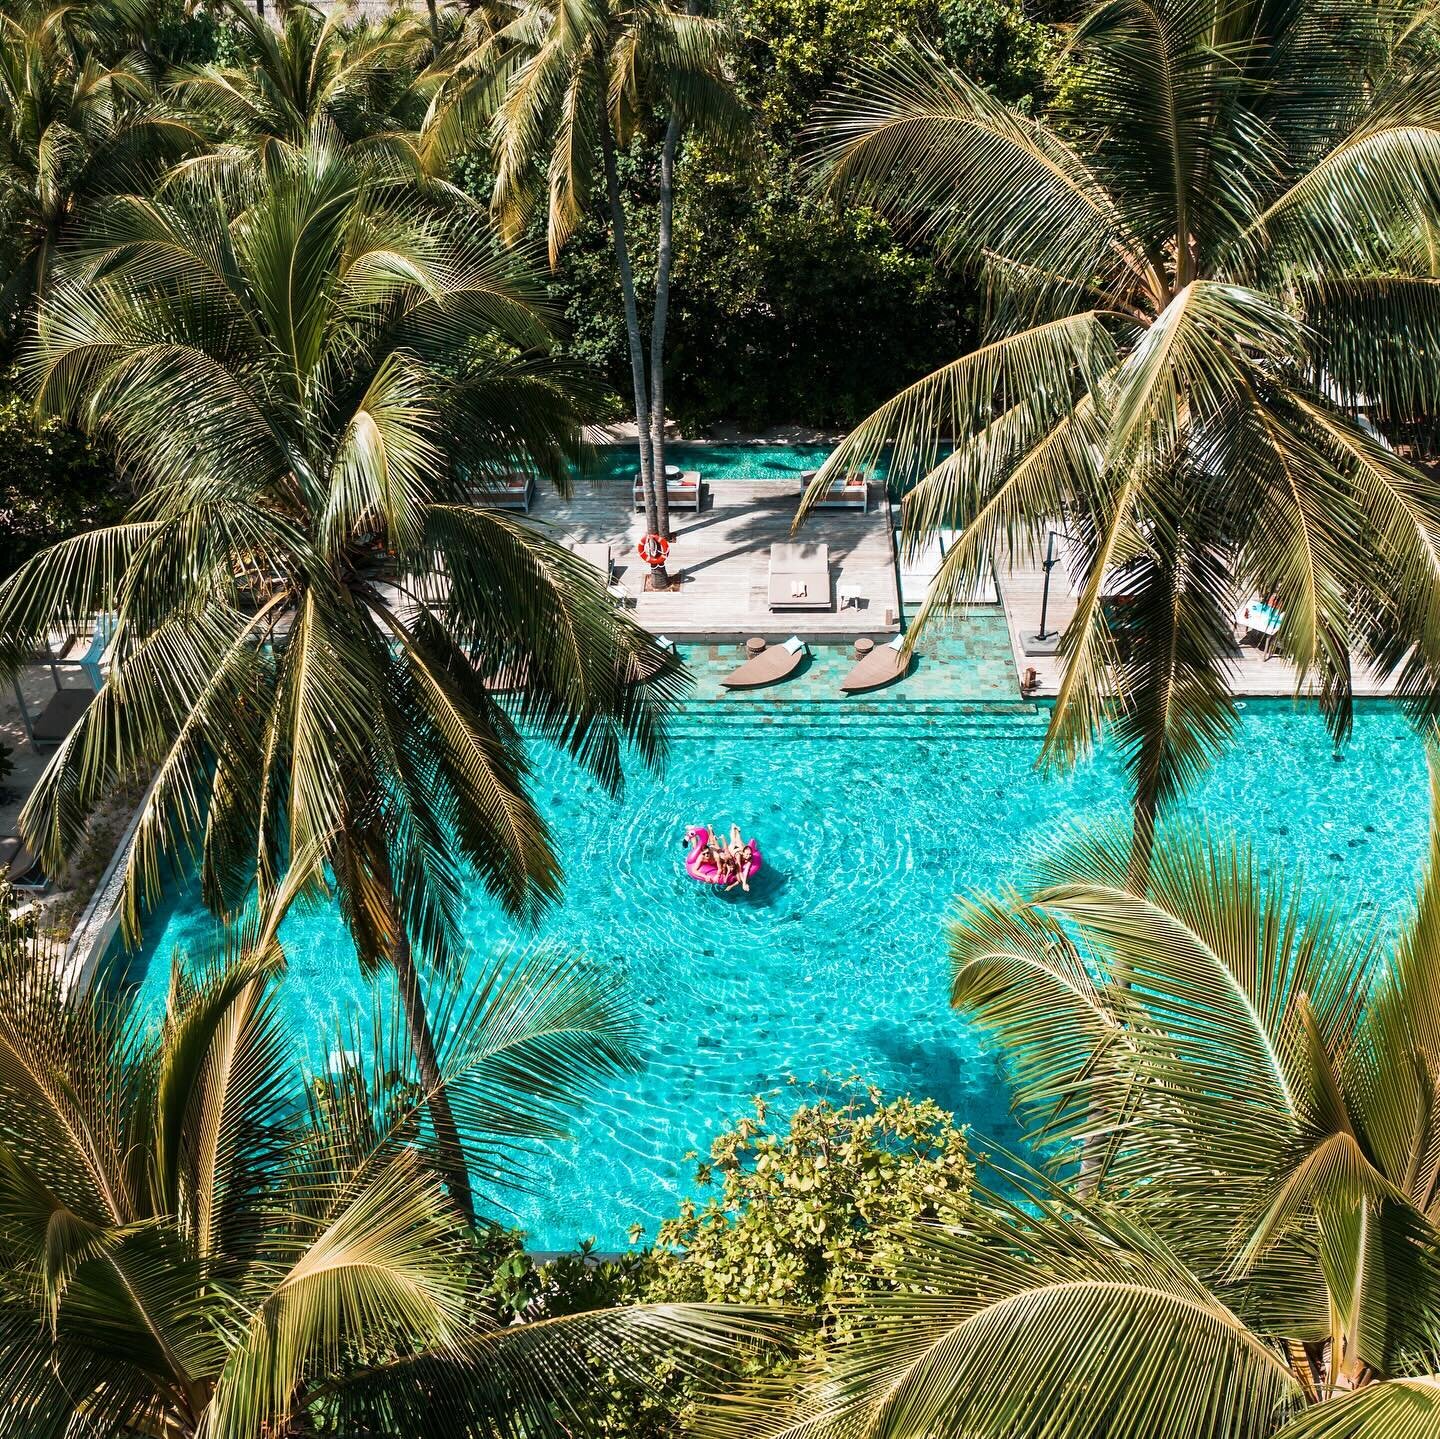 Easter Fairyland at @vakkarumaldives 🐣🌴🌊

A family egg hunt, vibrant entertainment, and a magical gala dinner, joined by the Easter Bunny. 🐇

With four days of ocean excursions, the Parrotfish kids club, football and padel courts, and an outdoor 